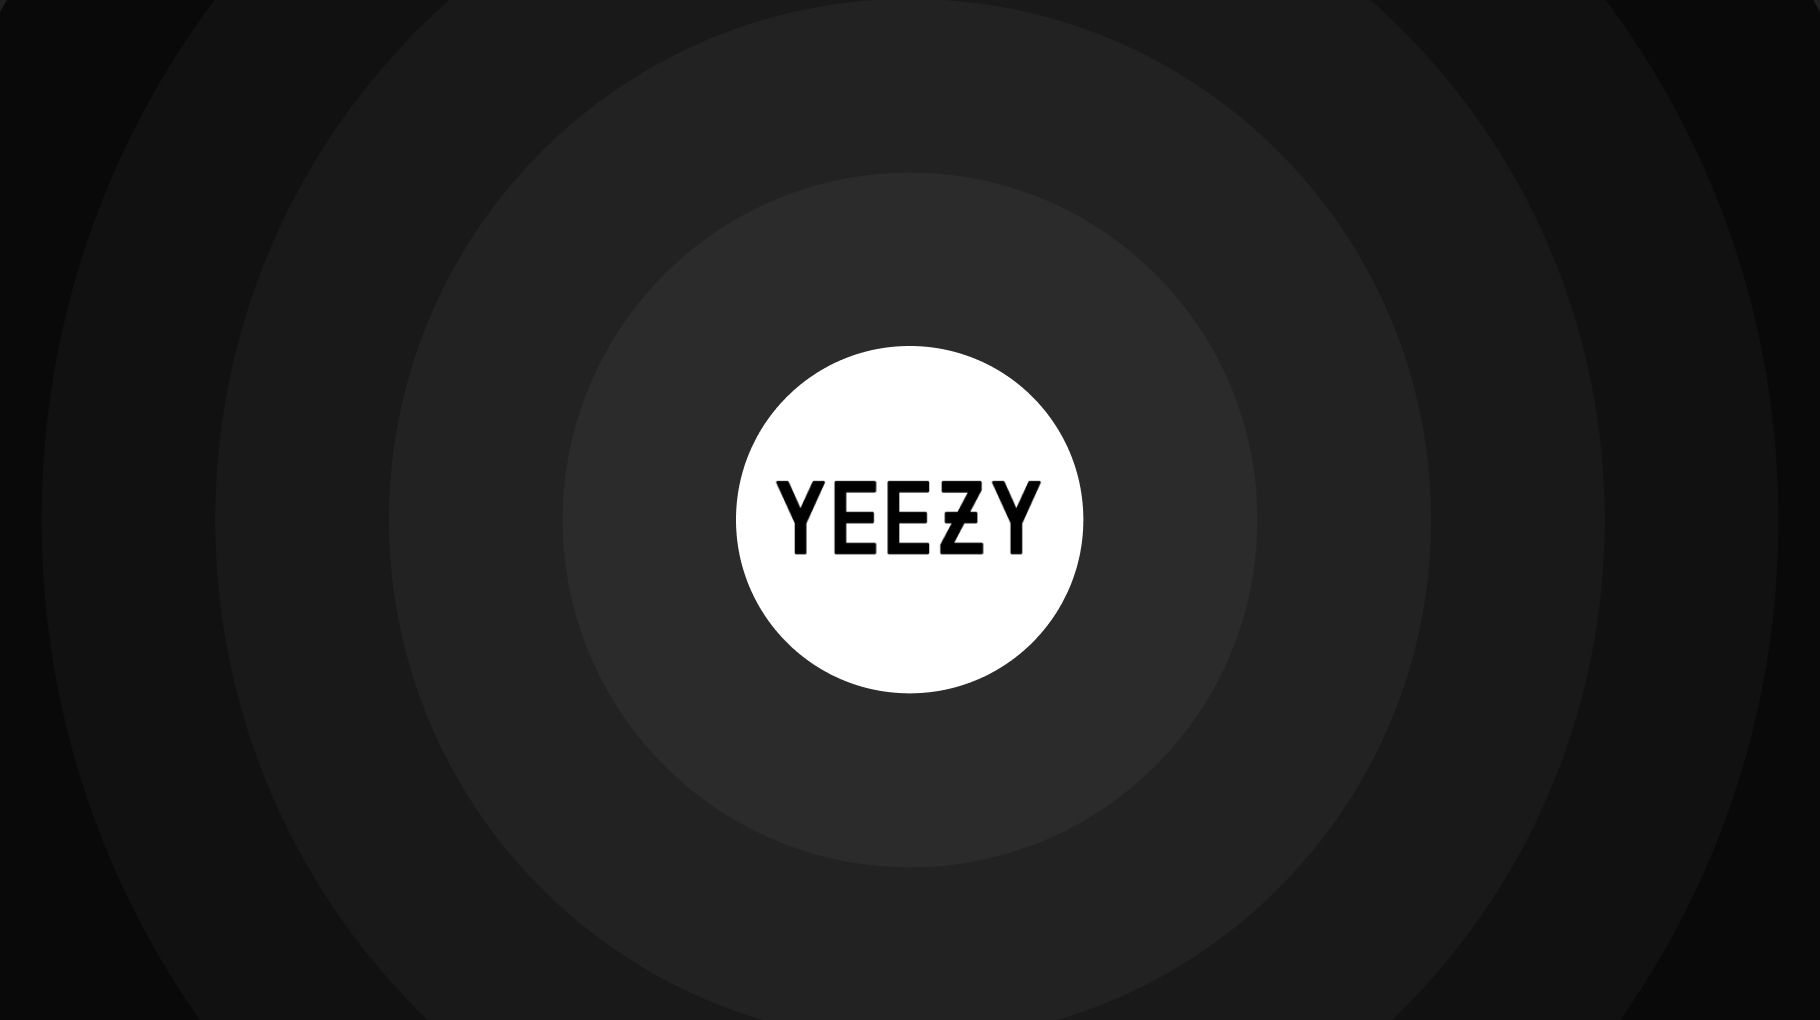 Yezzy Revenue and Growth